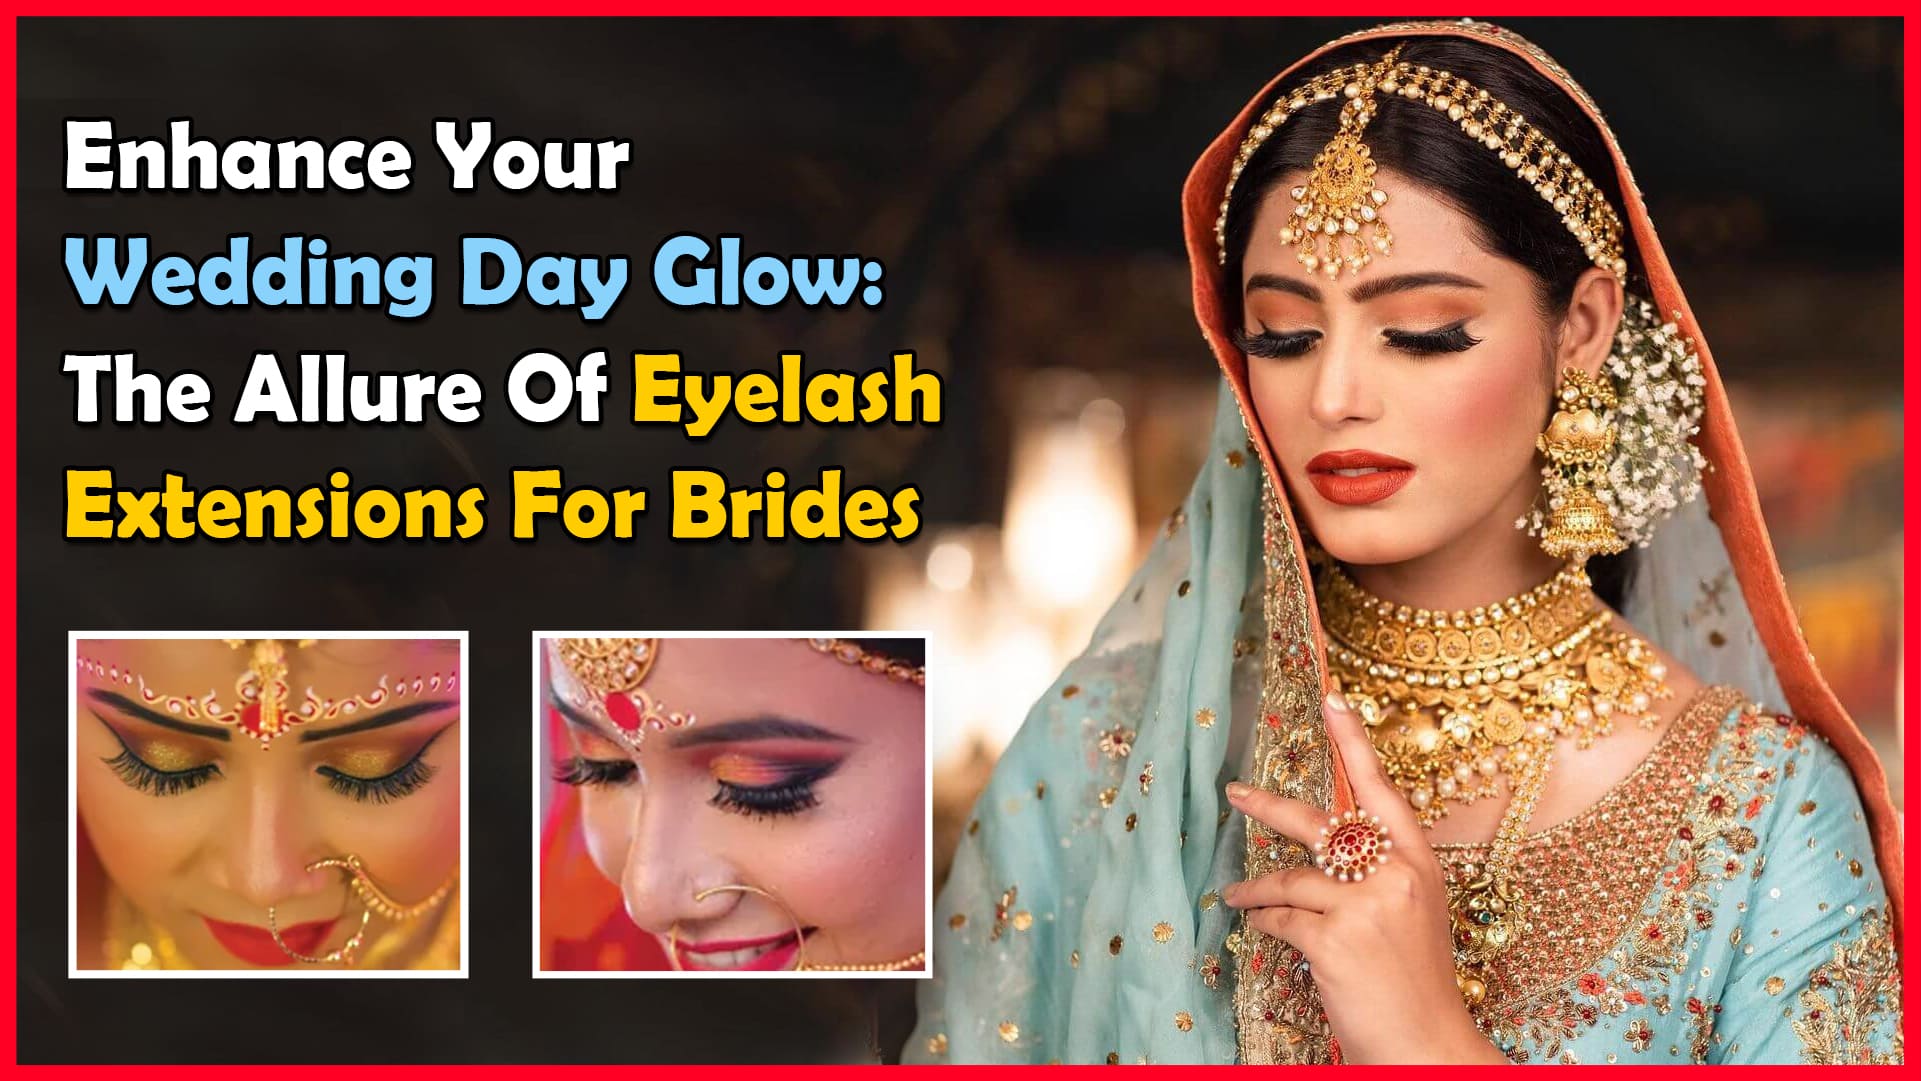 Enhance your wedding day glow: The allure of eyelash extensions for brides